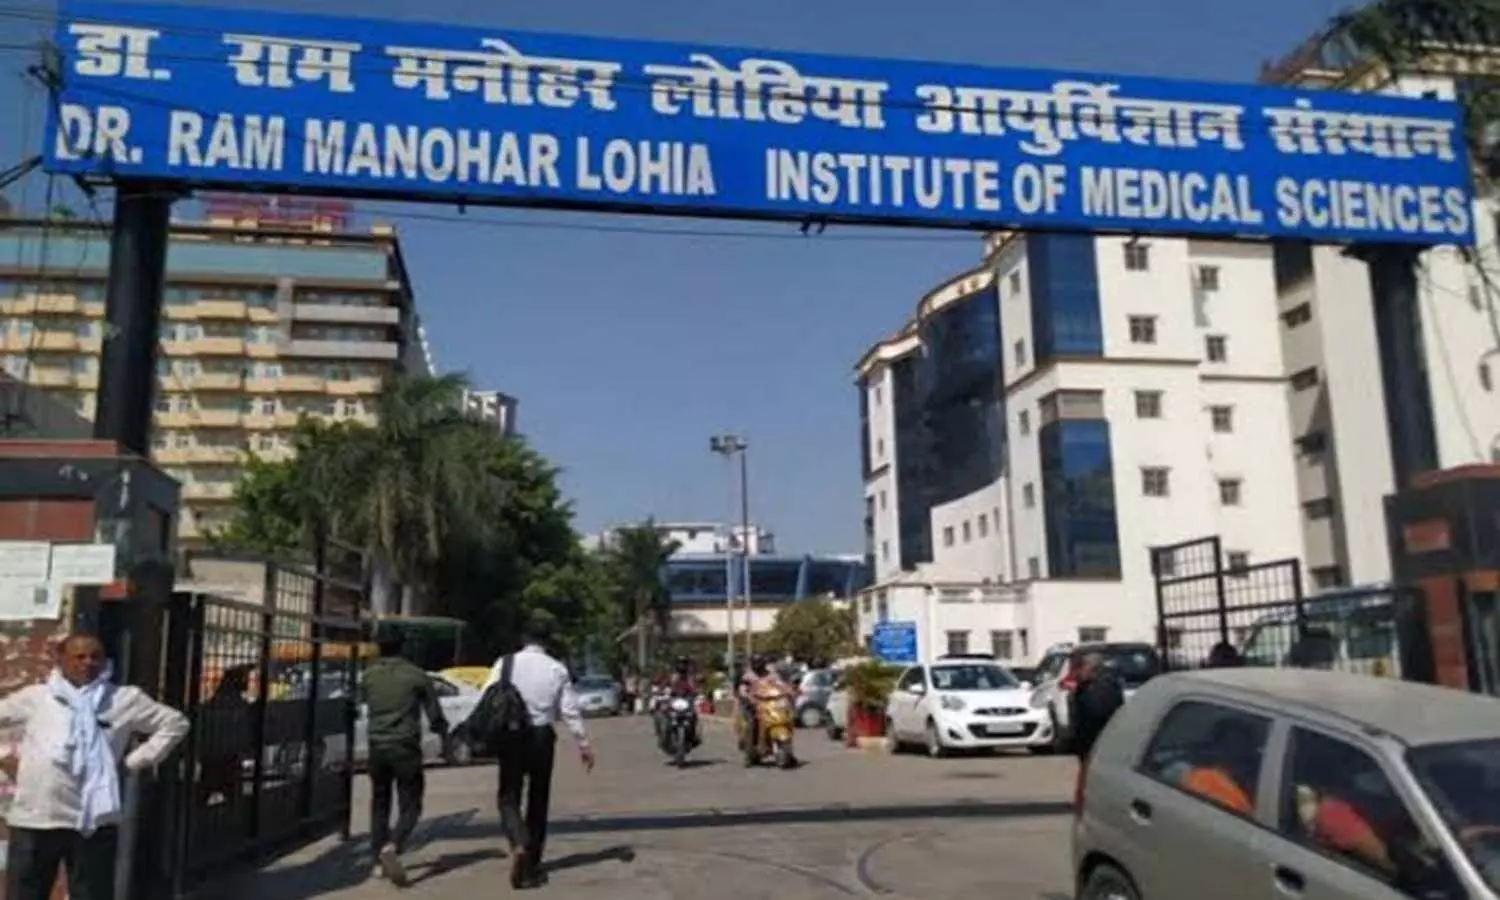 Recruitment of personnel in Lohia Institute, need for 8 outsourcing services including nursing, pharmacist, apply like this